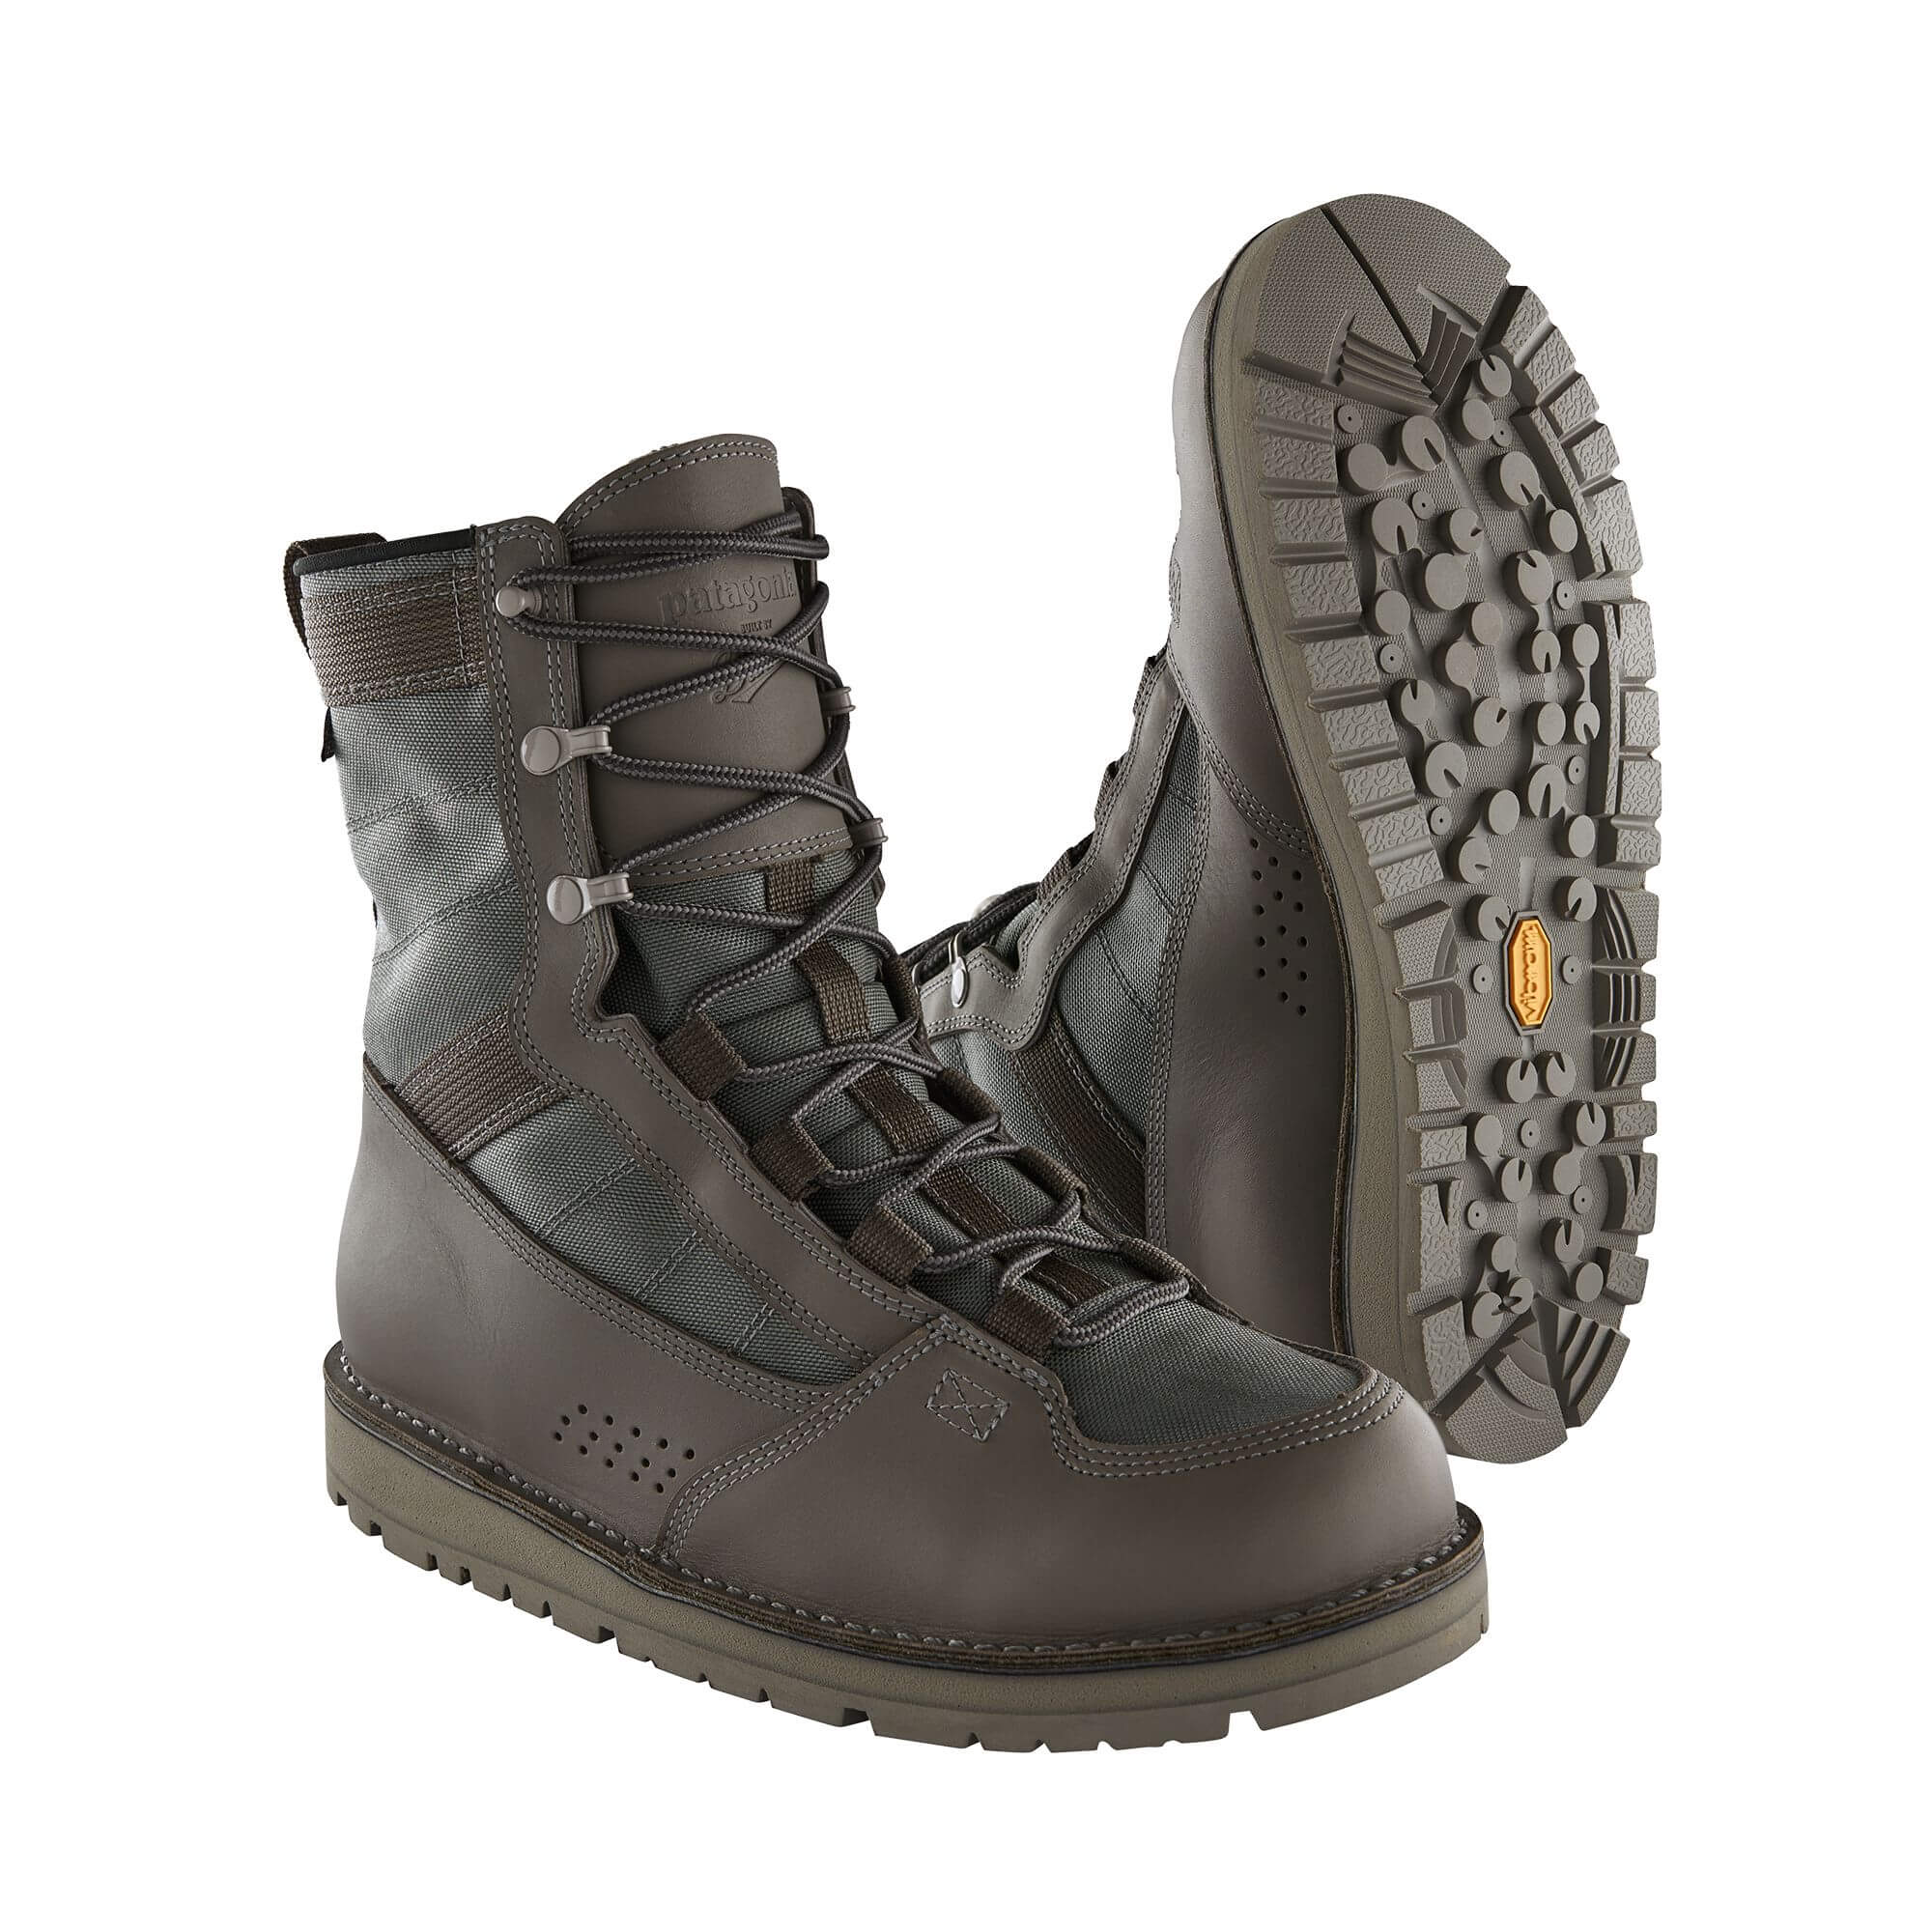 Patagonia River Salt Wading Boot (by Danner) - 14